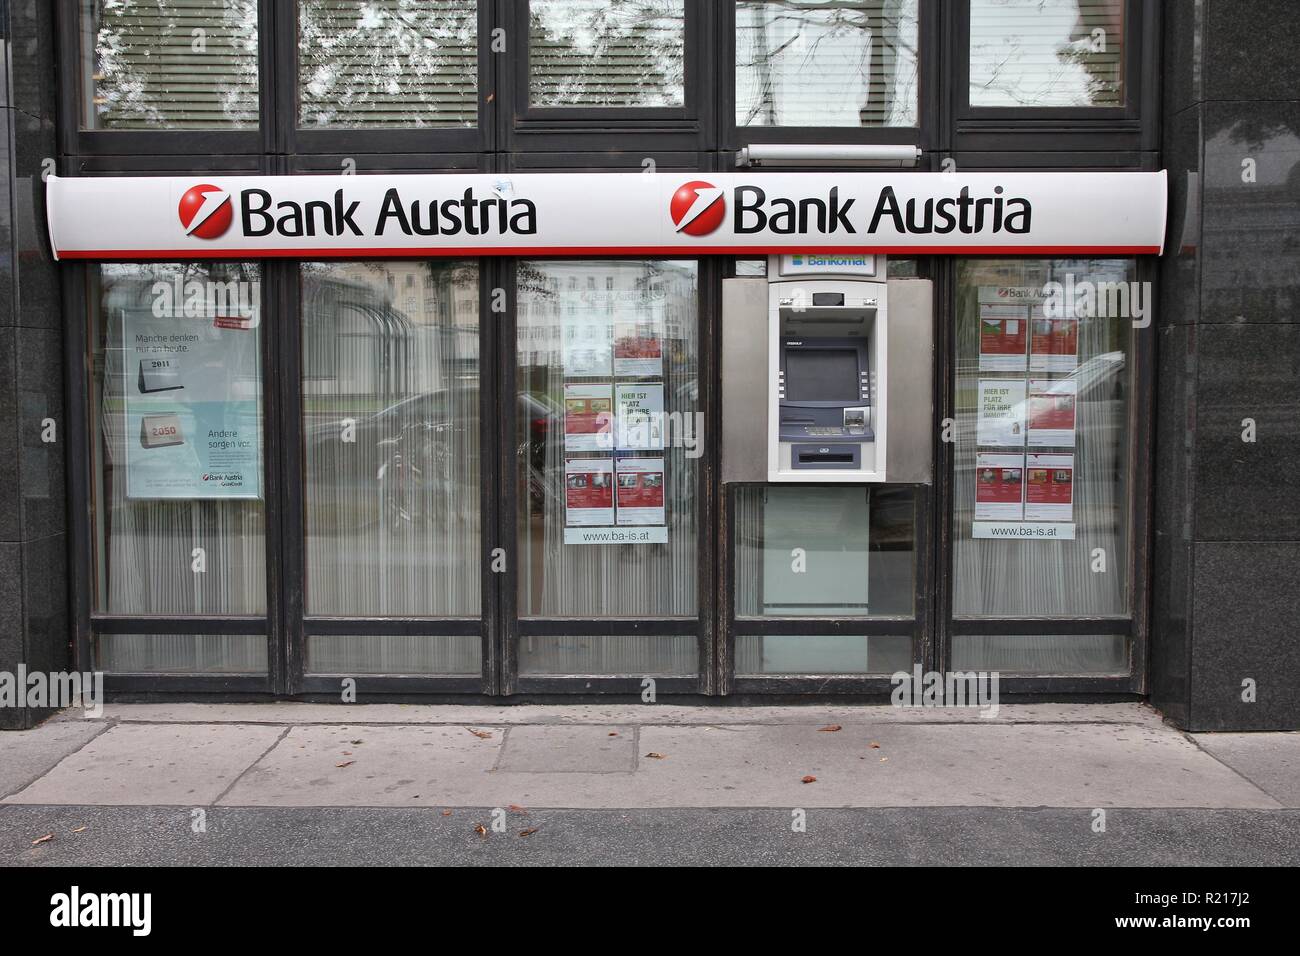 VIENNA - SEPTEMBER 7: Bank Austria branch on September 7, 2011 in Vienna. Bank Austria is part of UniCredit Group, 21st largest bank in the world by a Stock Photo